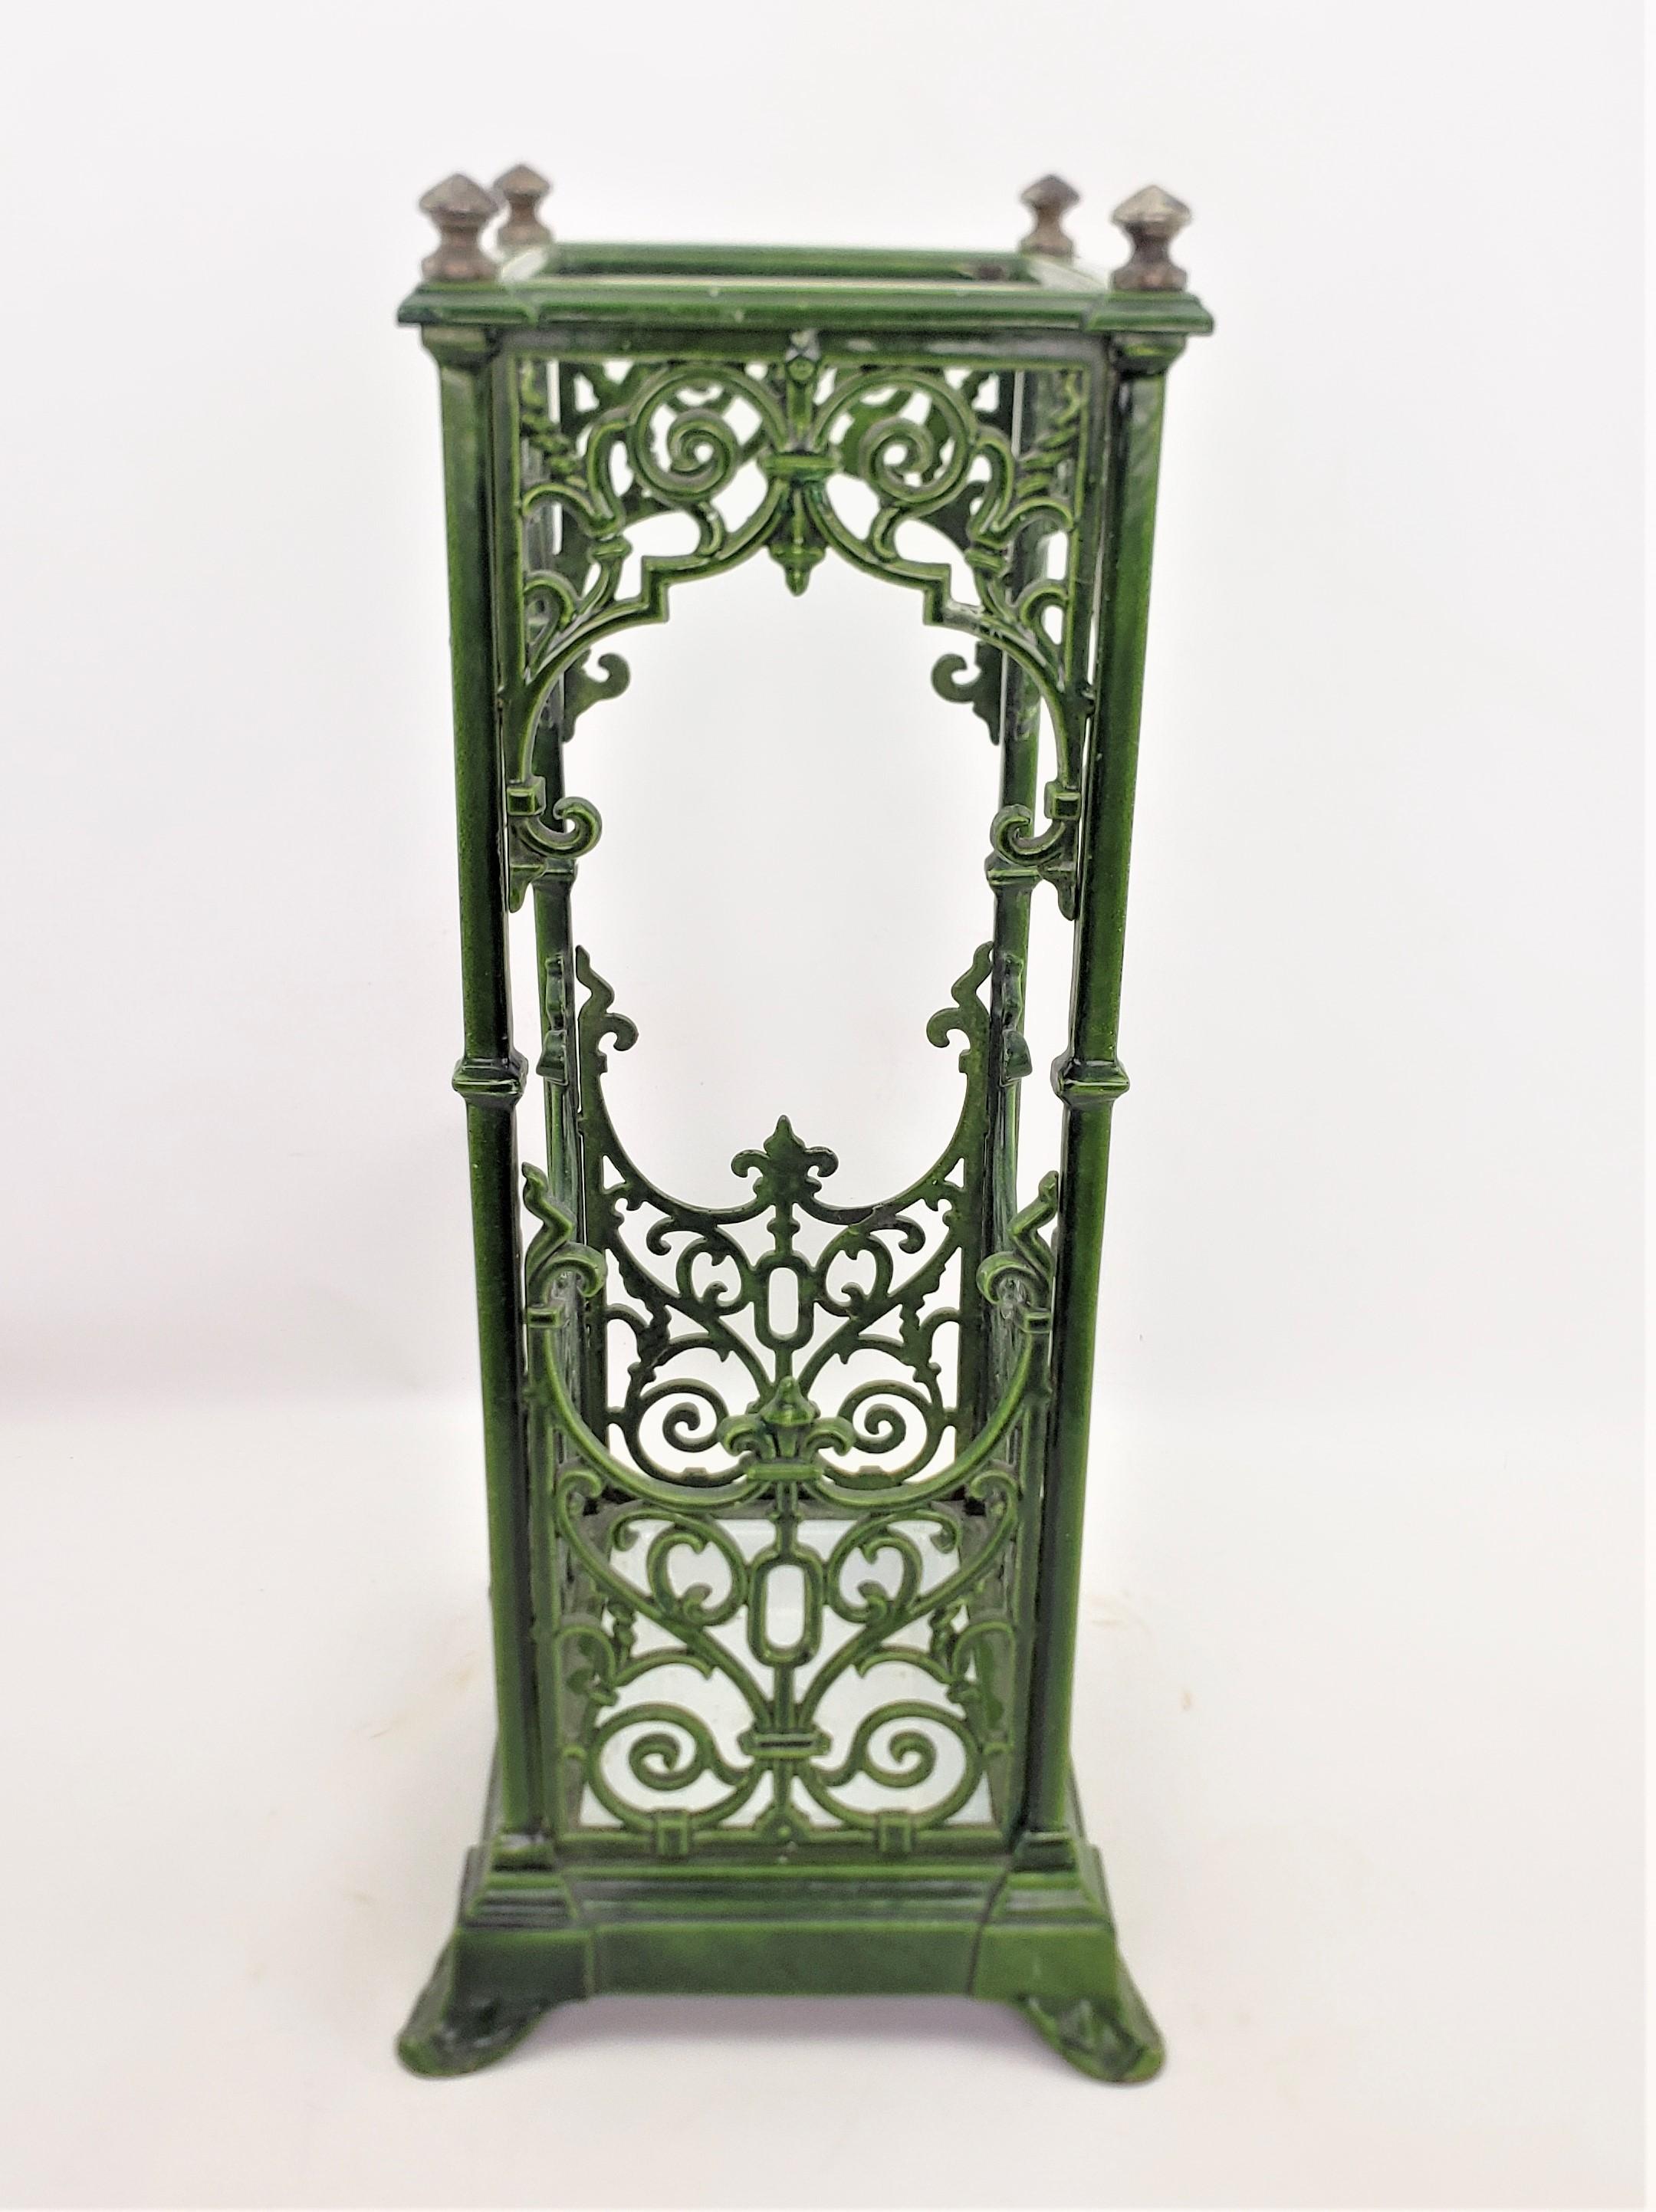 Edwardian Antique Green Enameled Cast Iron Cane or Umbrella Stand with Brass Accents For Sale